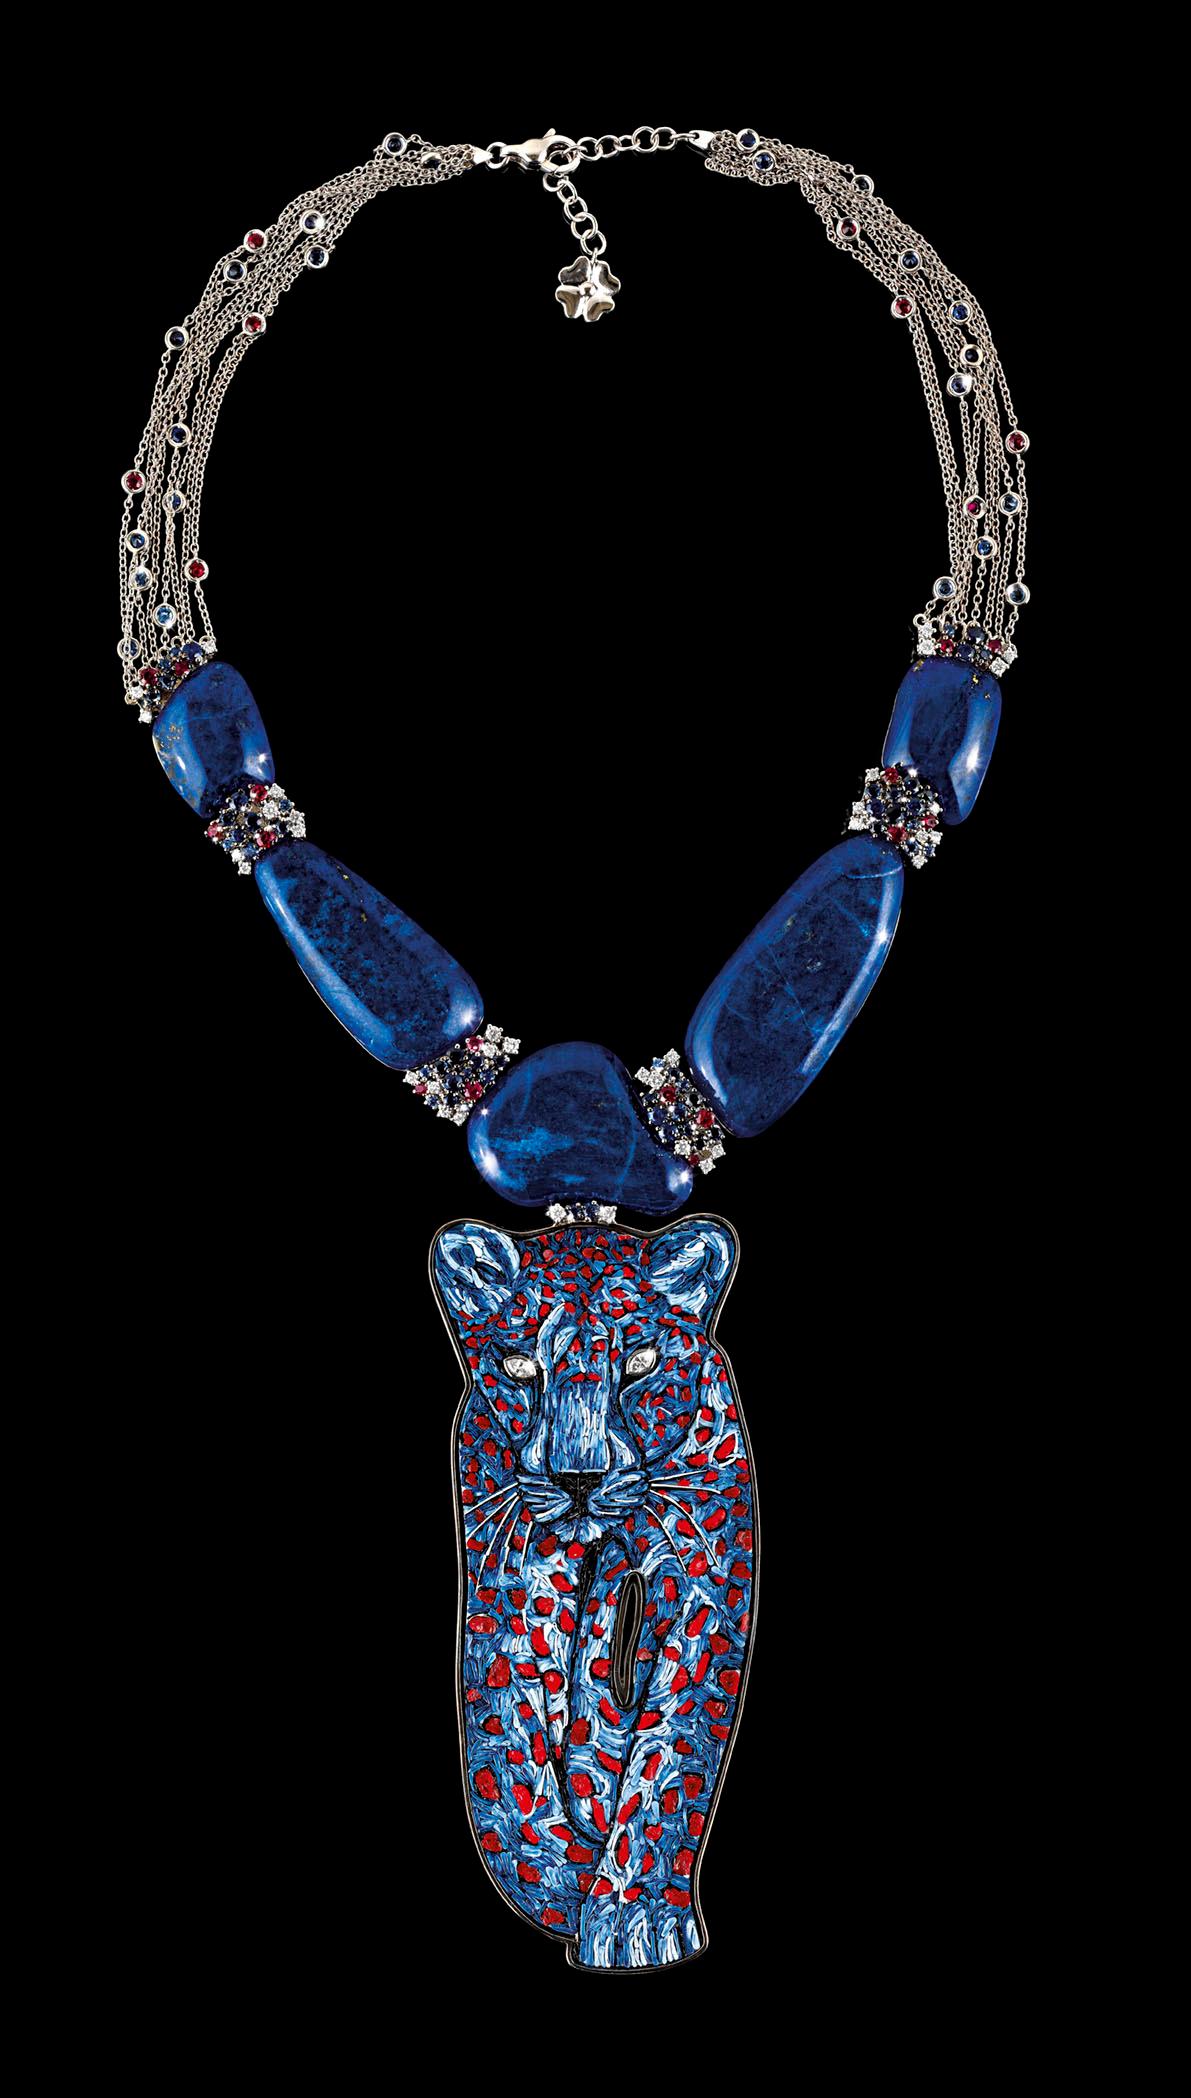 Modern Necklace White Gold White Diamonds Sapphires Ruby Handdecorated with Micromosaic For Sale